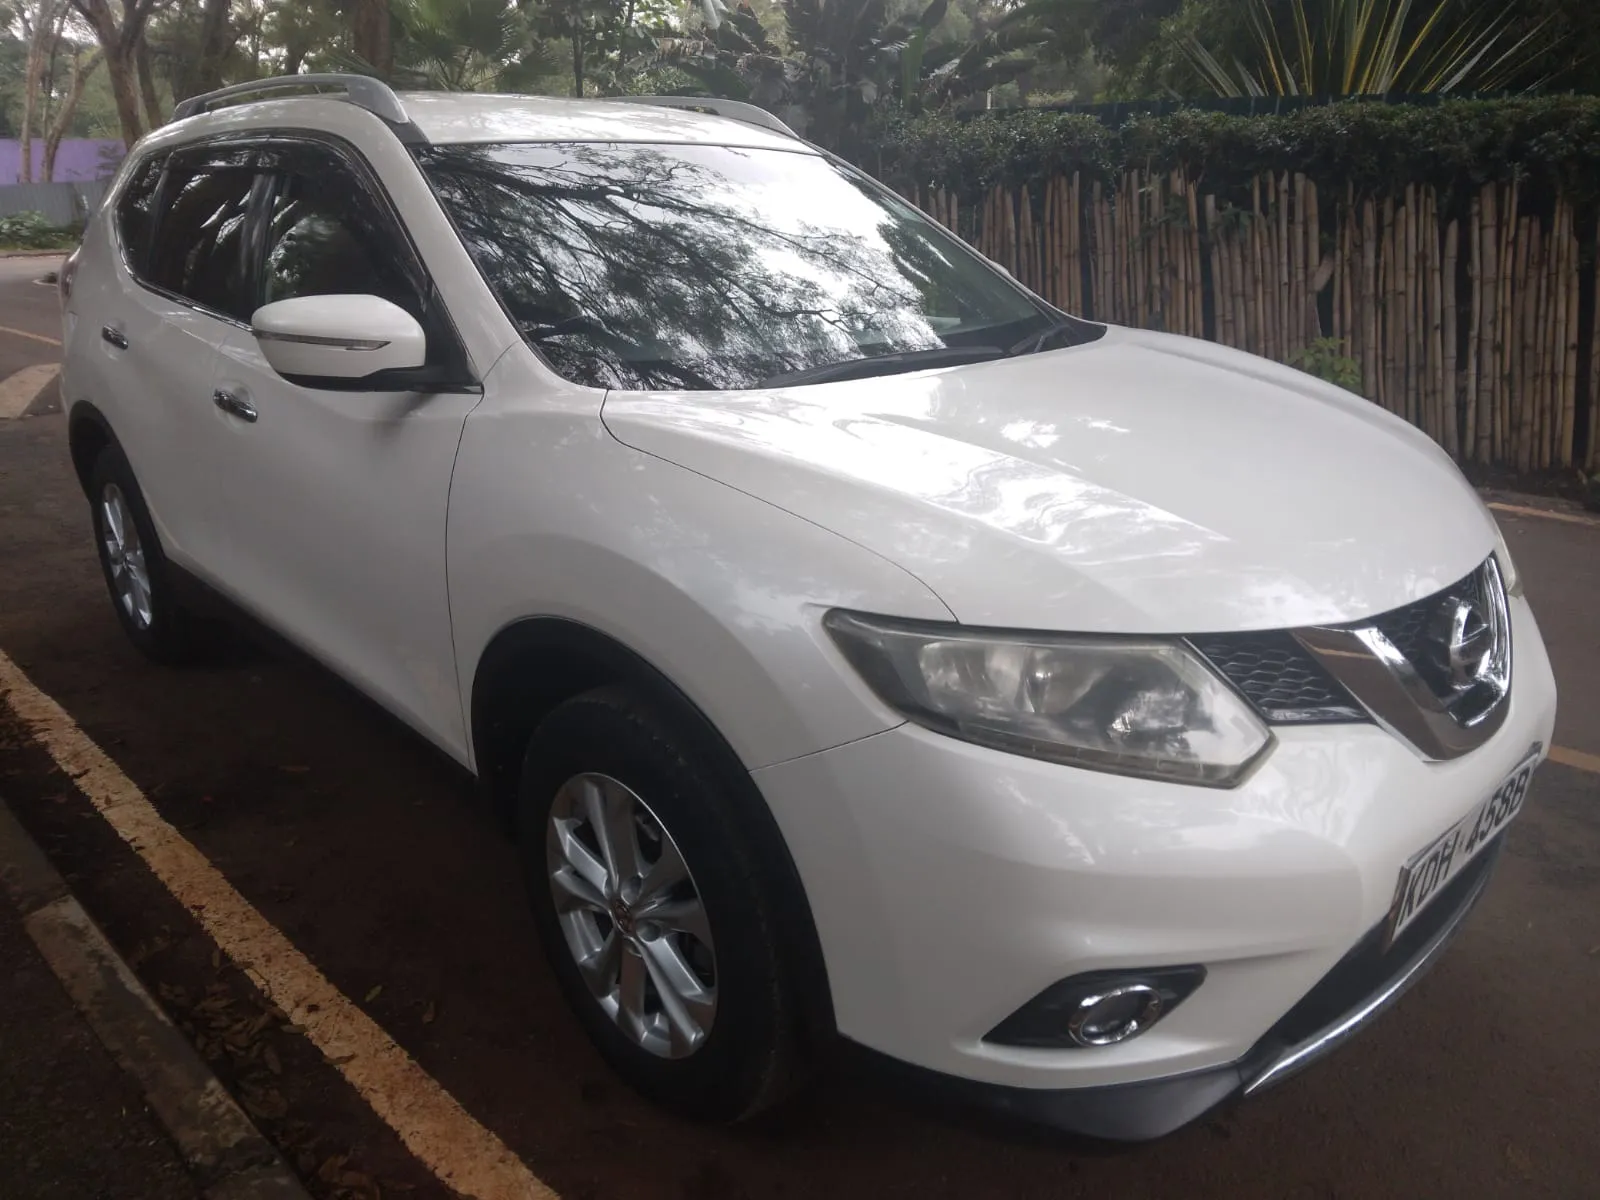 Cars Cars For Sale/Vehicles-Nissan XTRAIL New Shape QUICK SALE You Pay 30% Deposit Trade in OK EXCLUSIVE 4